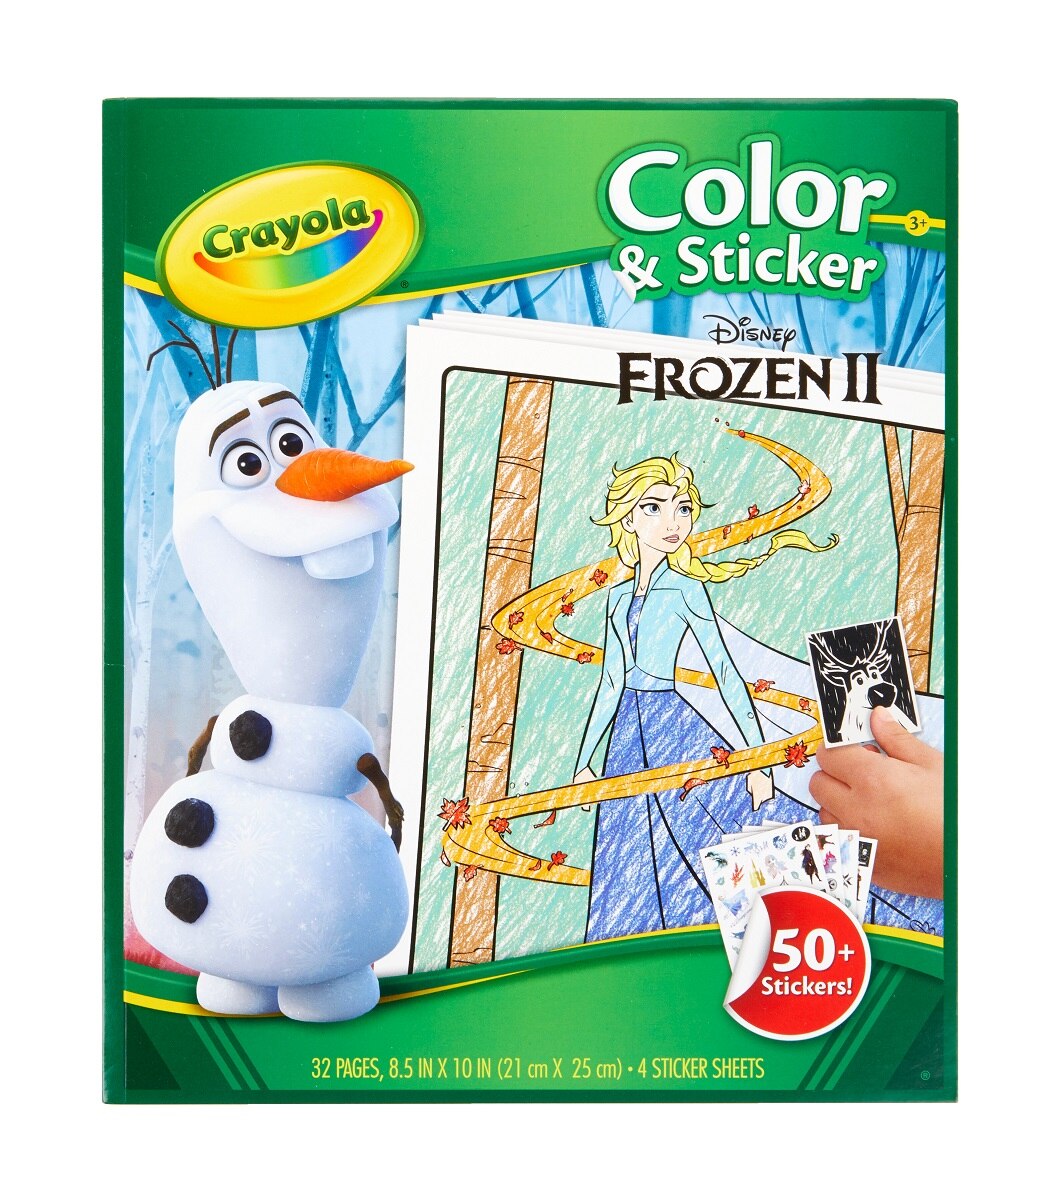 Crayola Frozen 2 Coloring Pages and Stickers